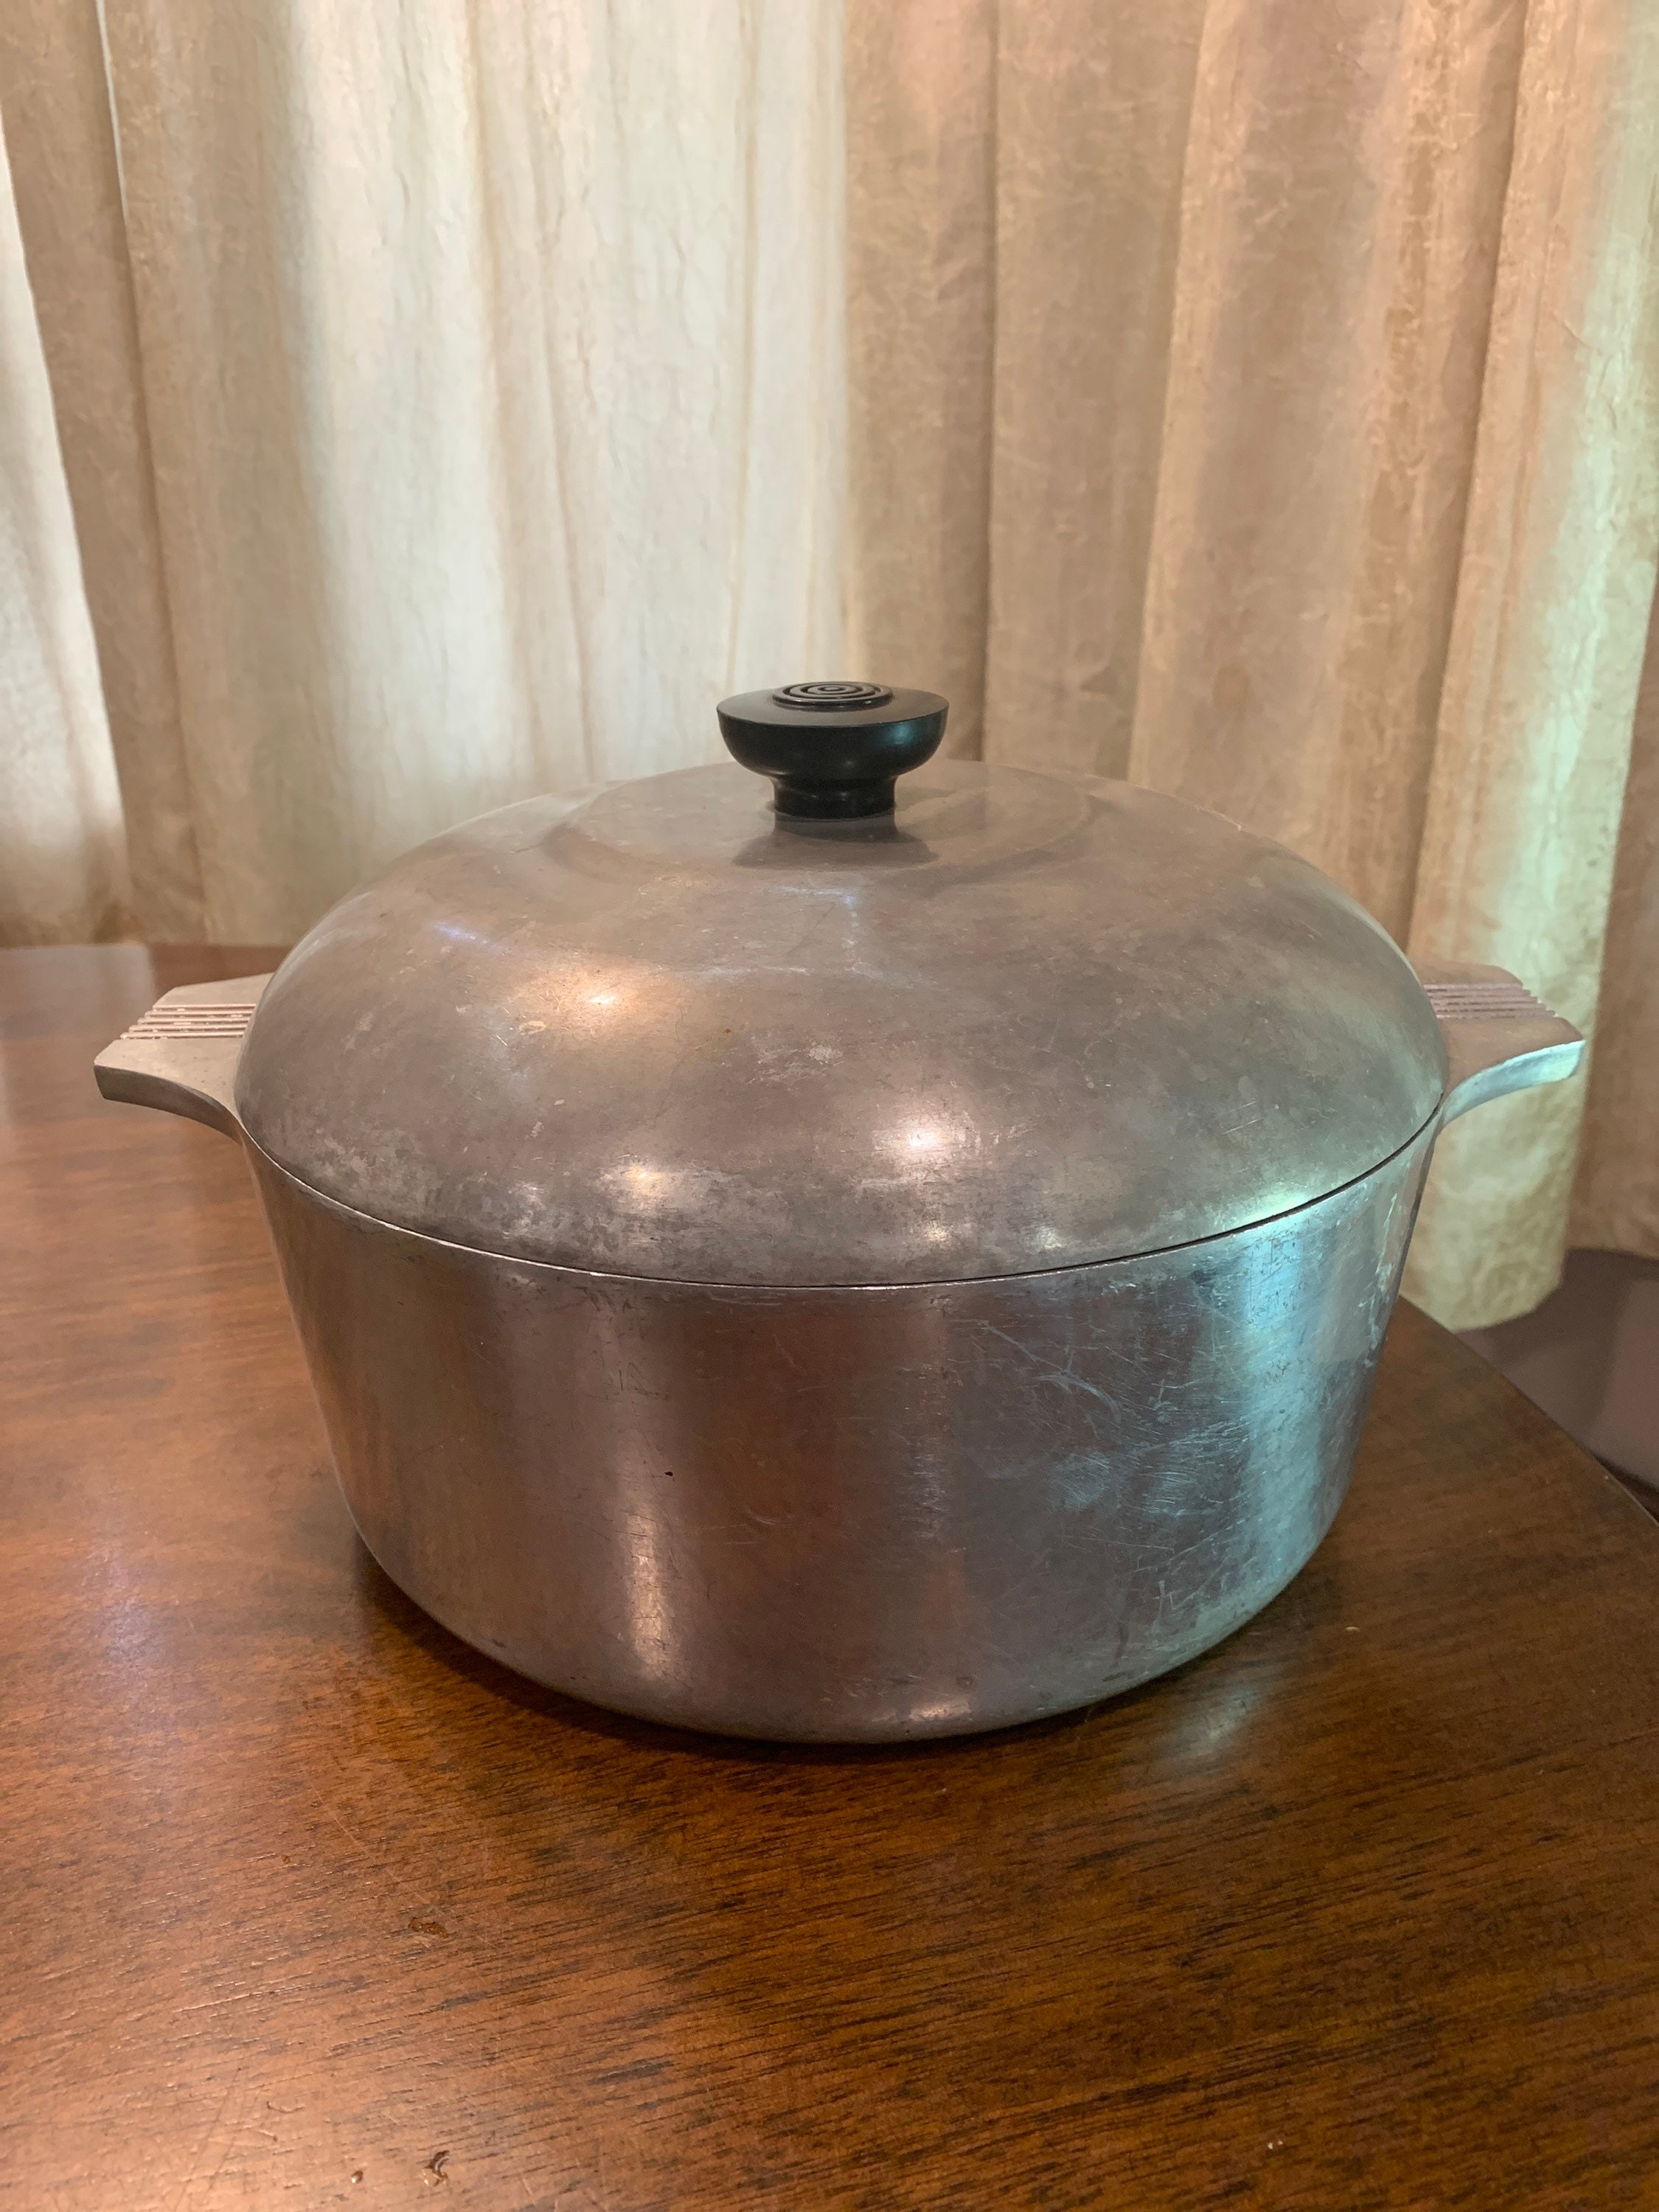 VINTAGE MAGNALITE 5 Qt DUTCH OVEN with Lid for Sale in